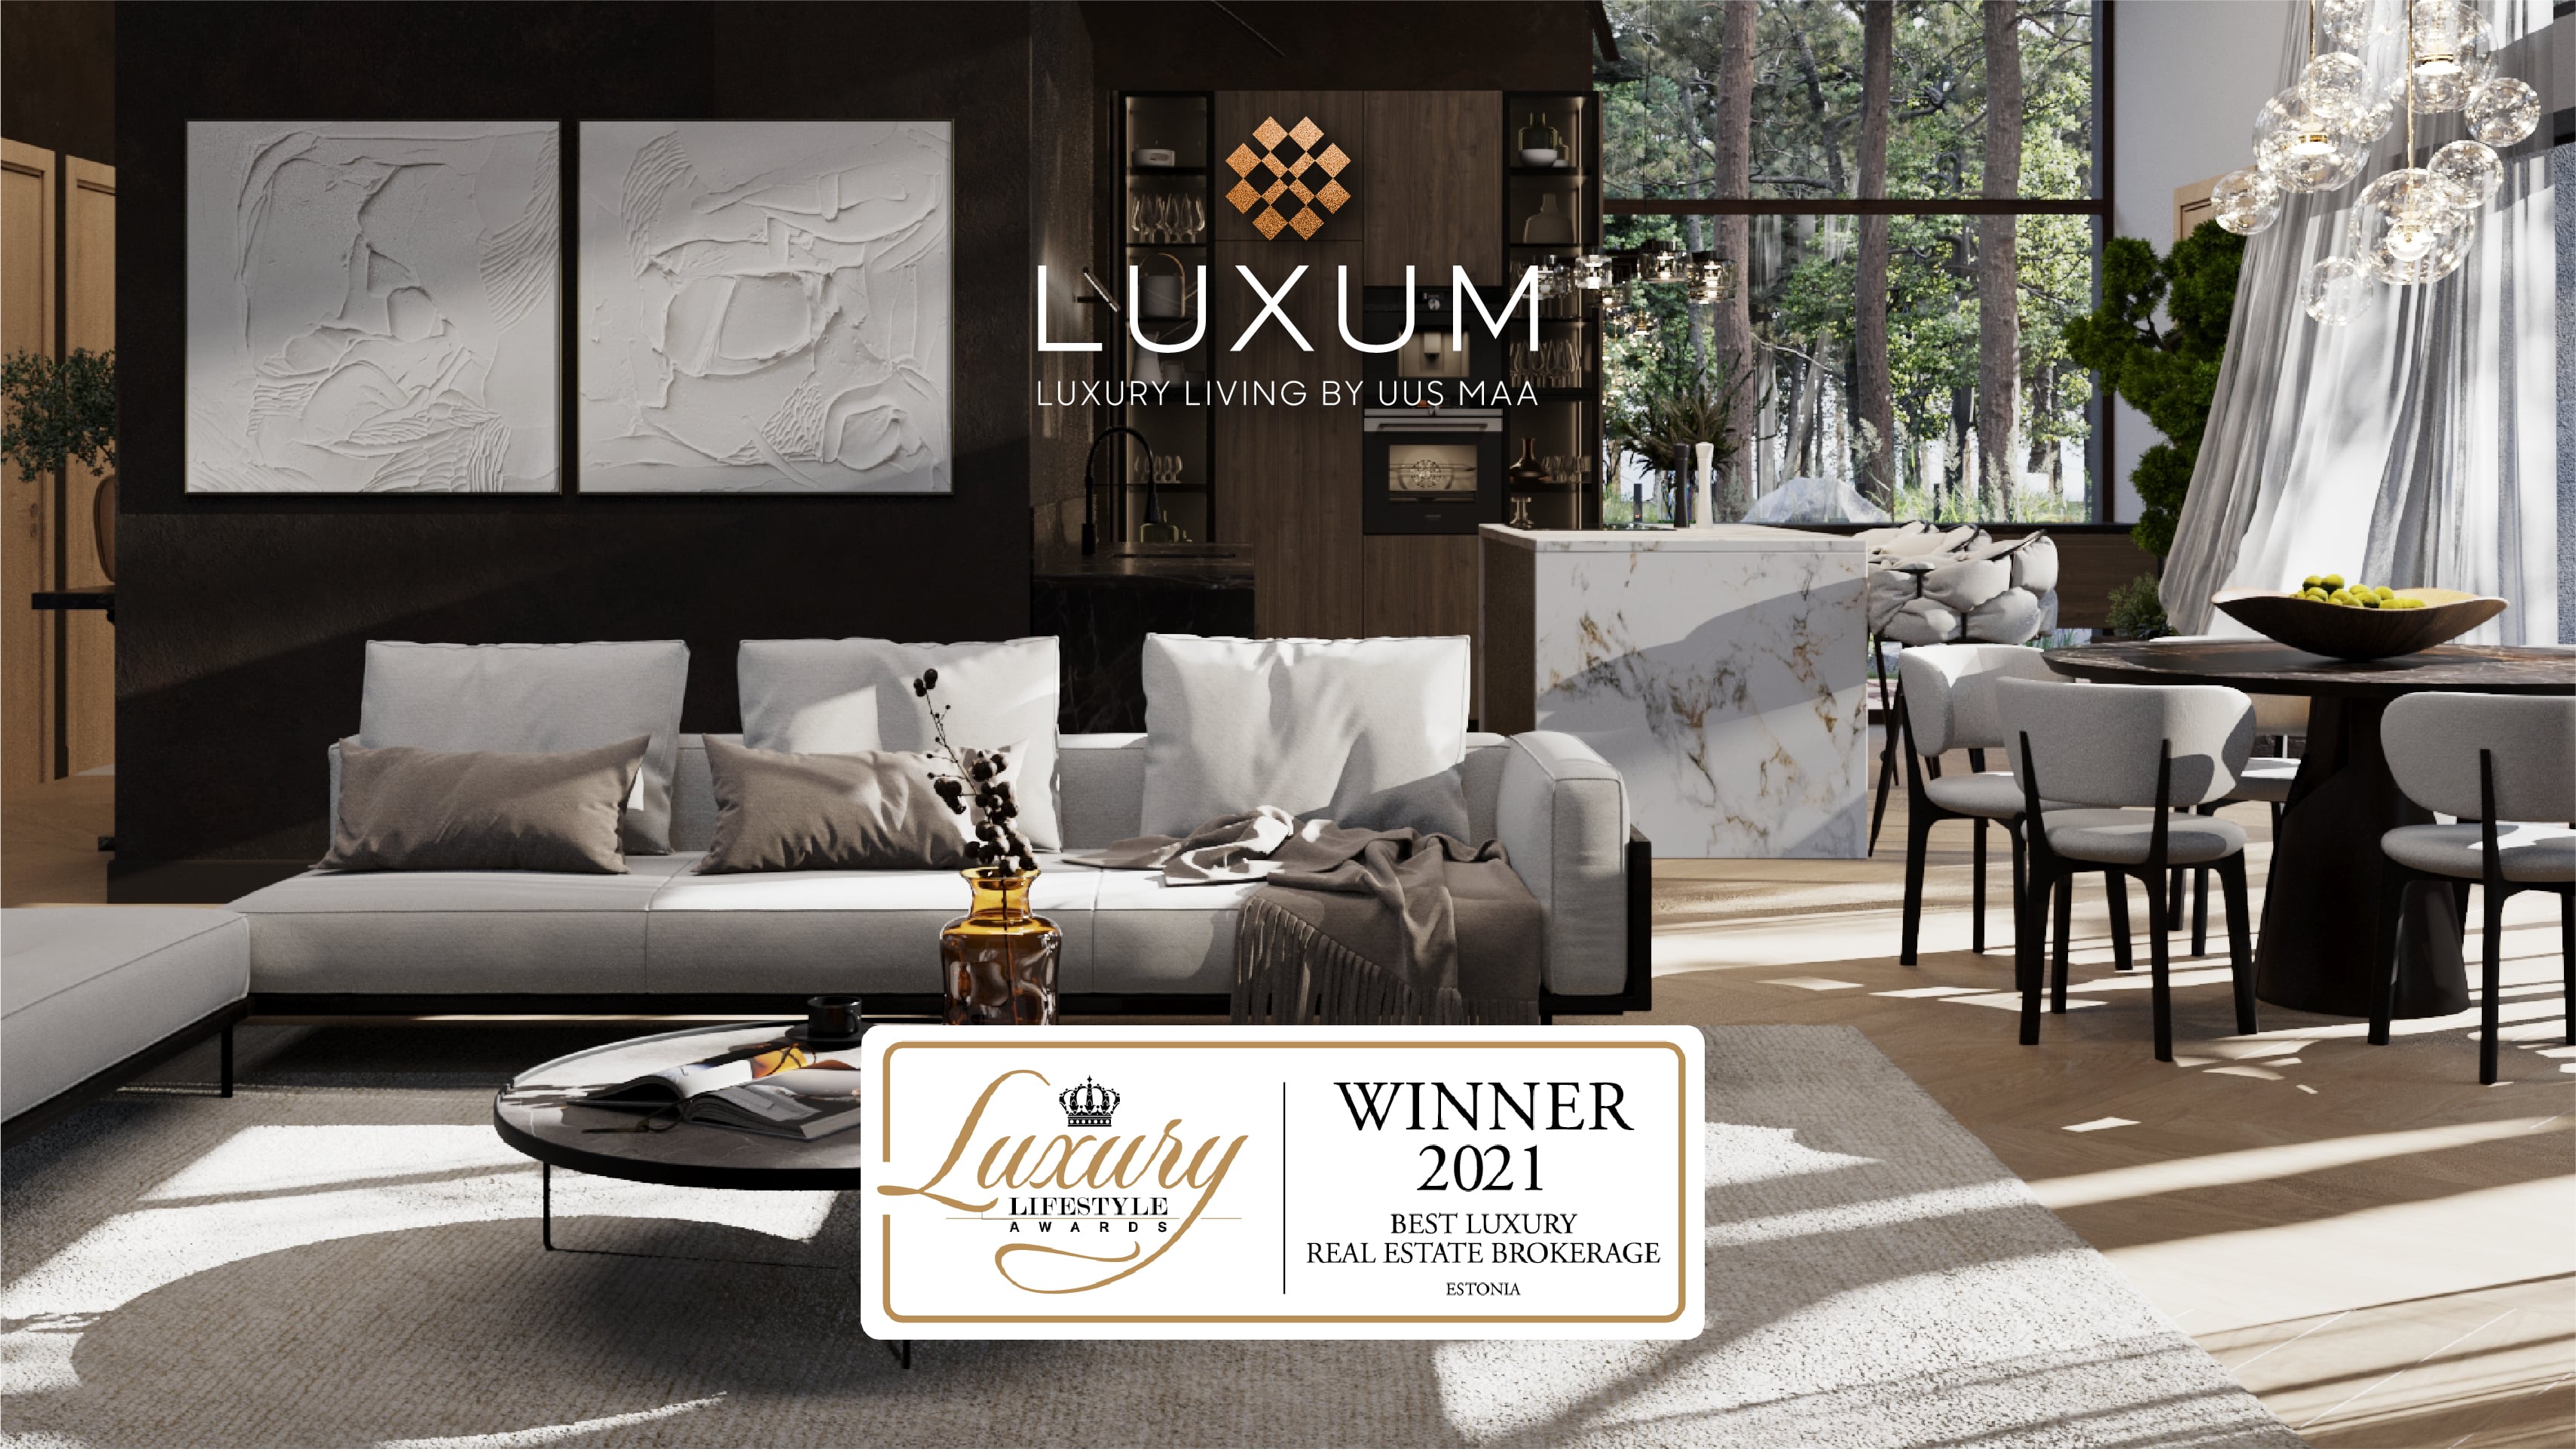 LUXUM by Uus Maa won the first prize at an international competition!